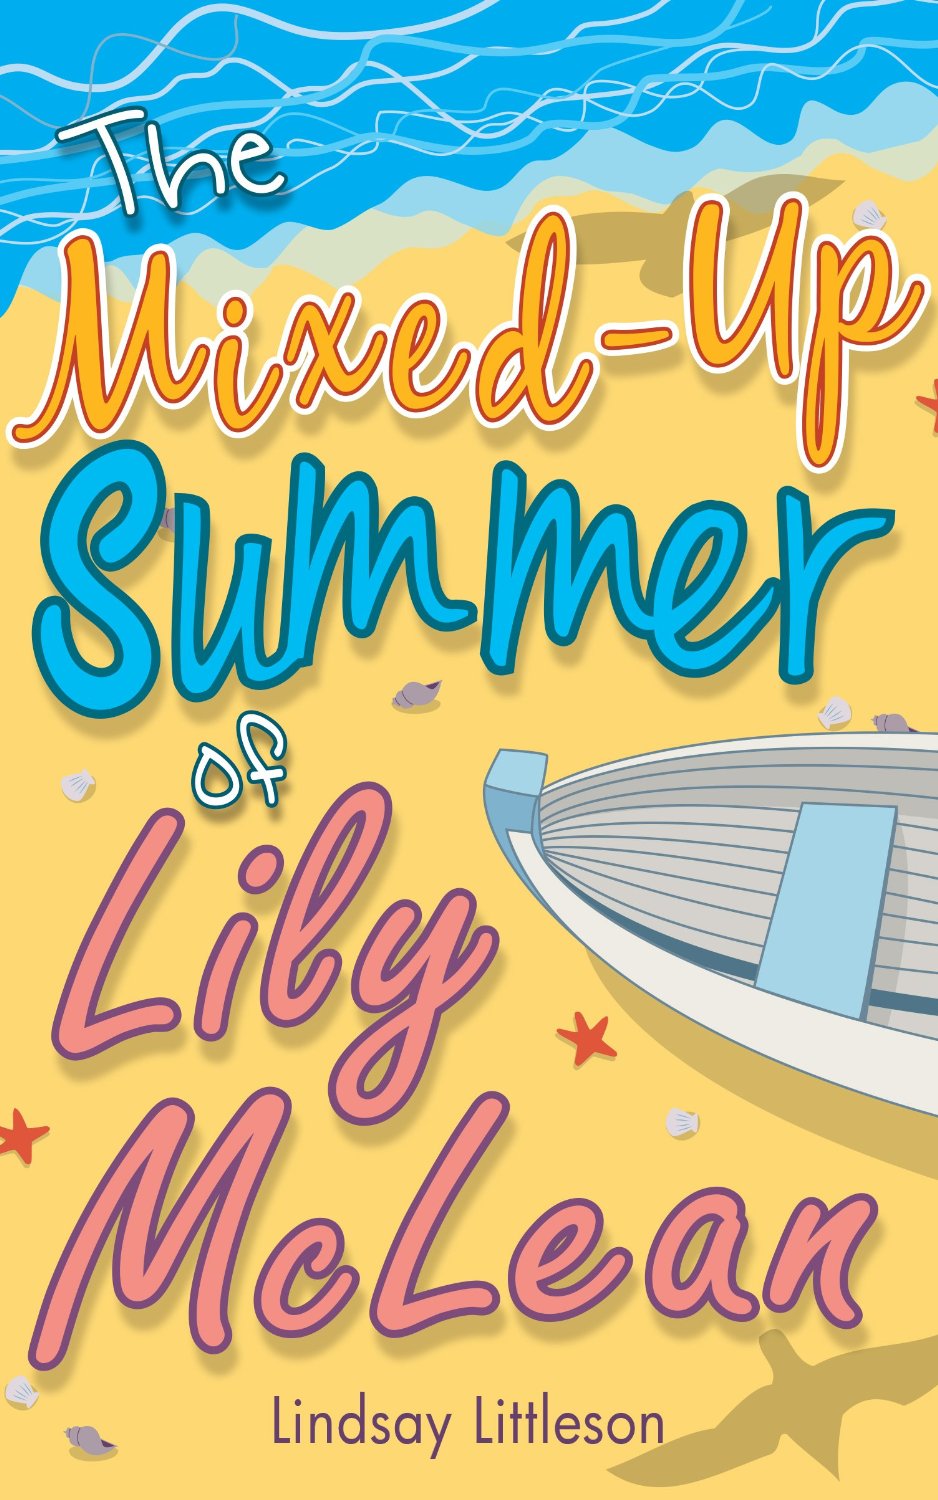 The Mixed-Up Summer of Lily McLean